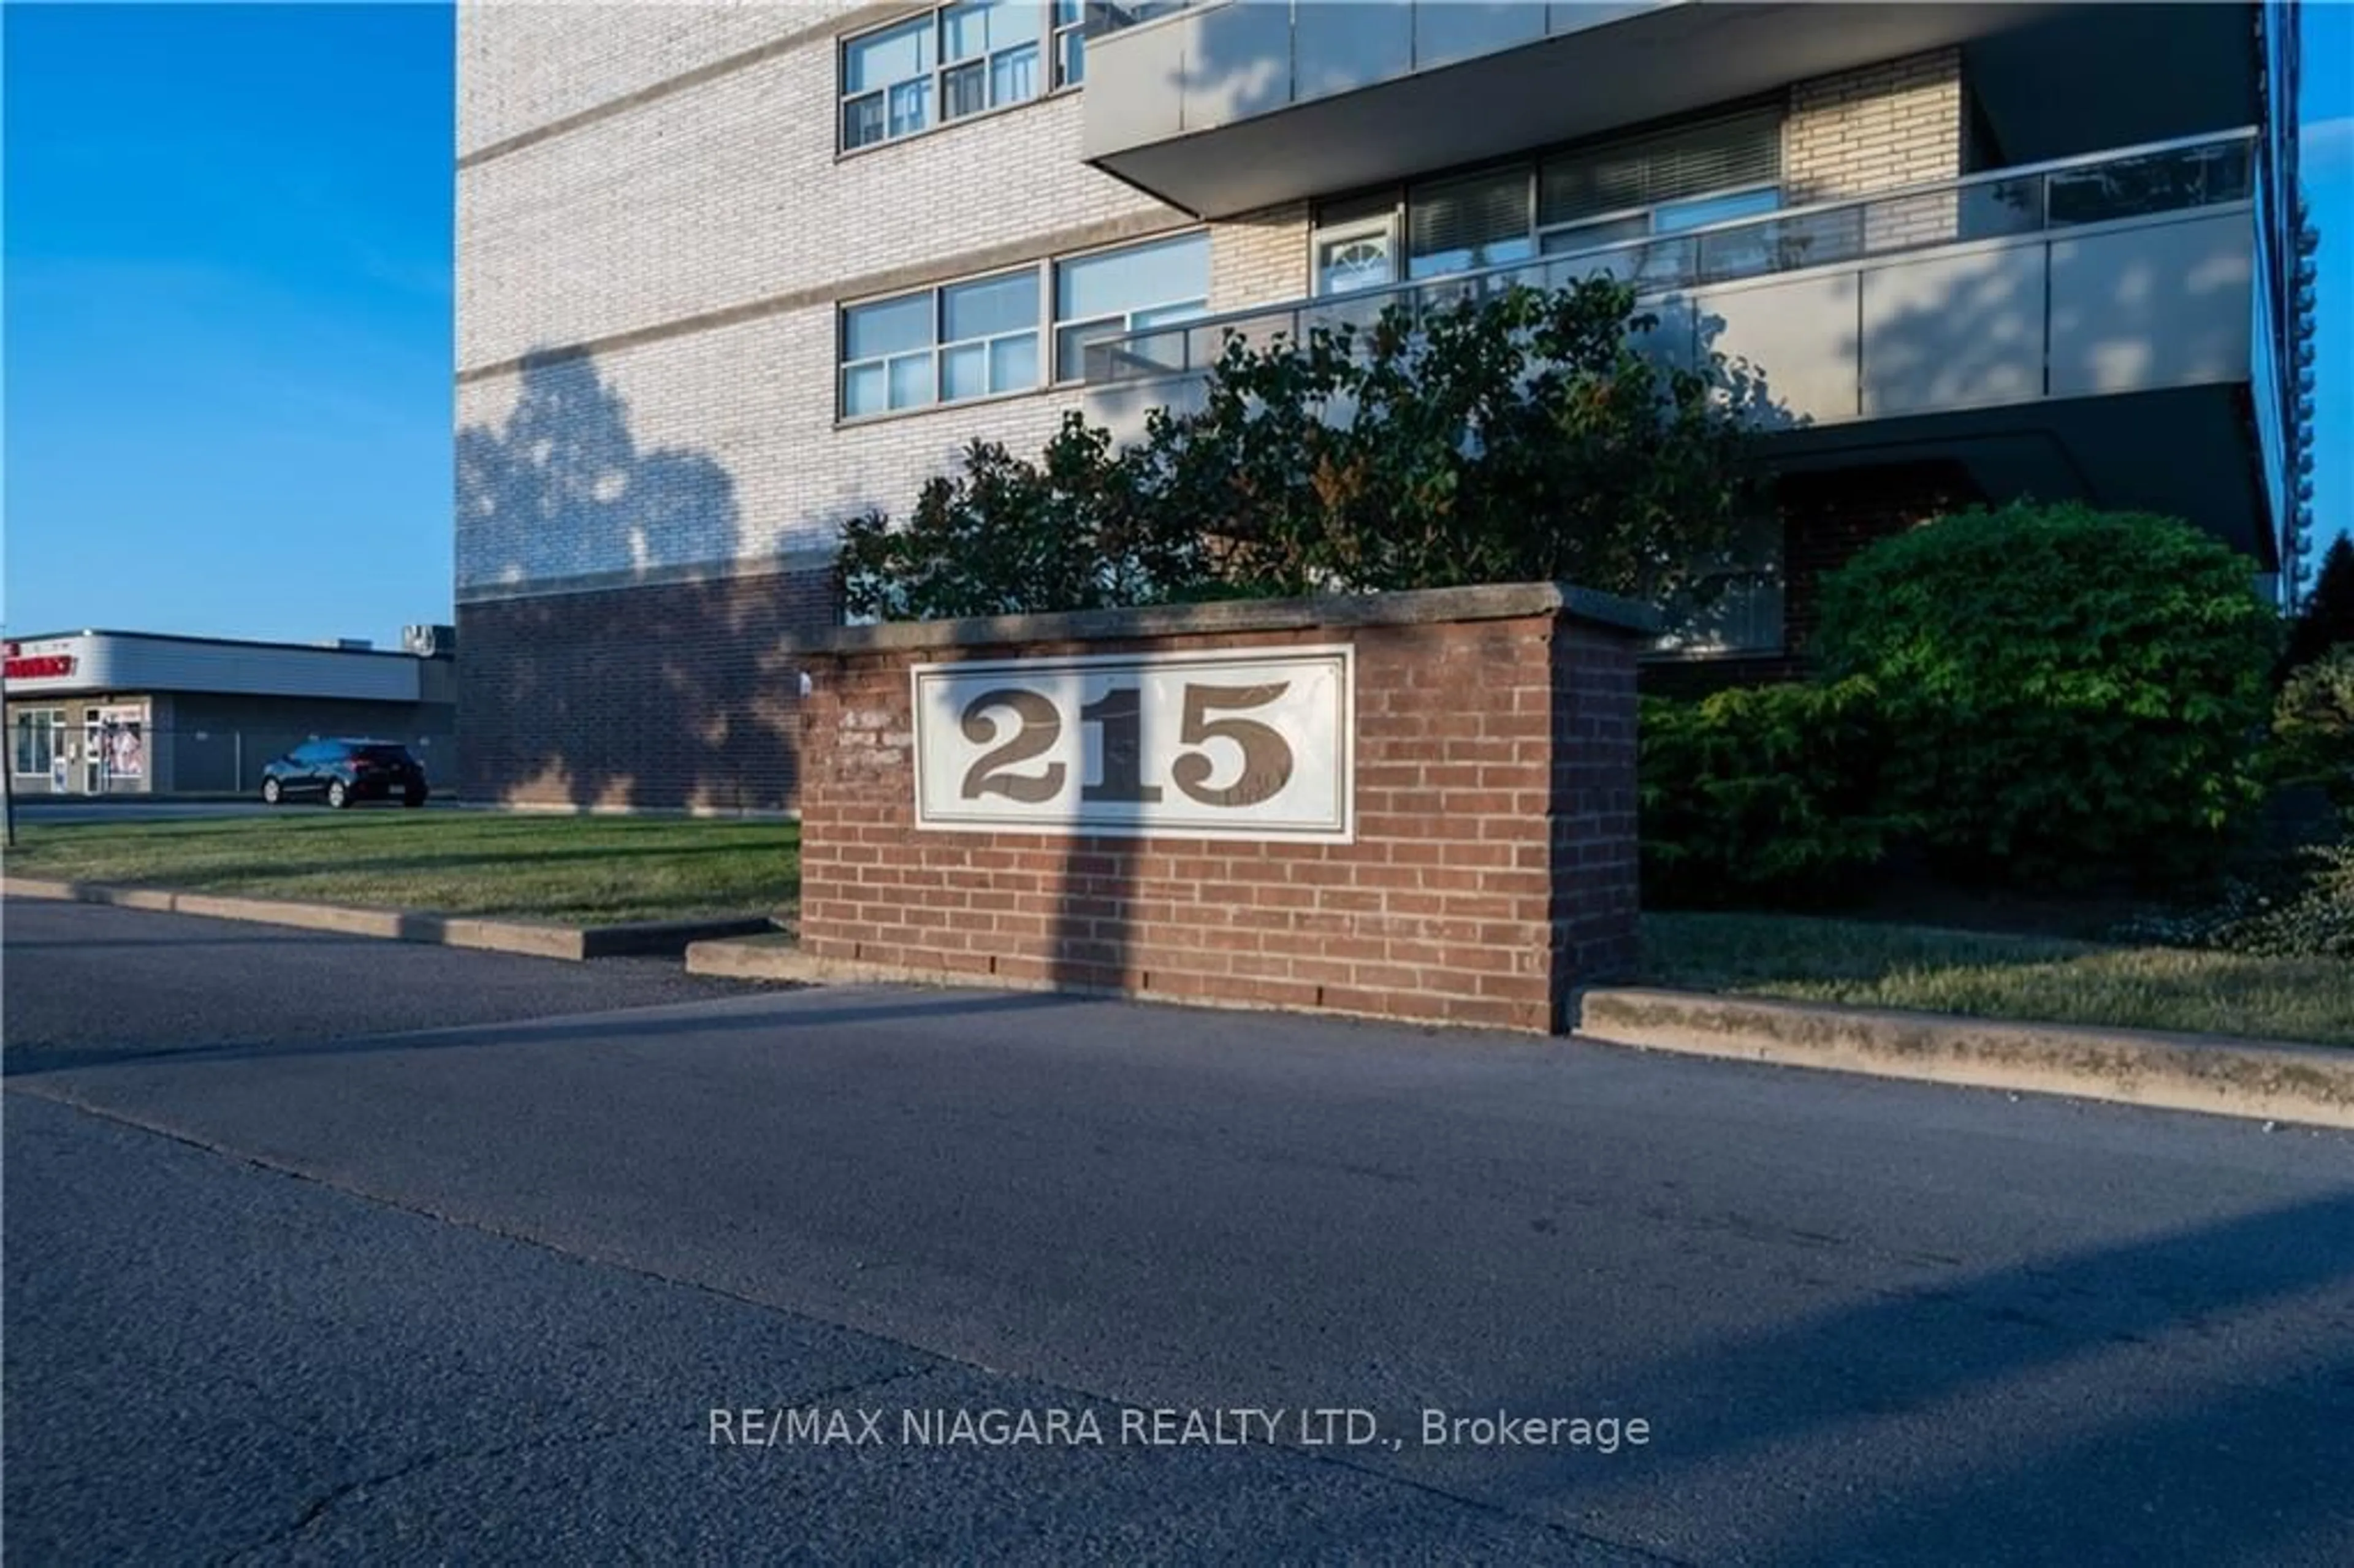 Outside view for 215 Glenridge Ave #1402, St. Catharines Ontario L2T 3J7